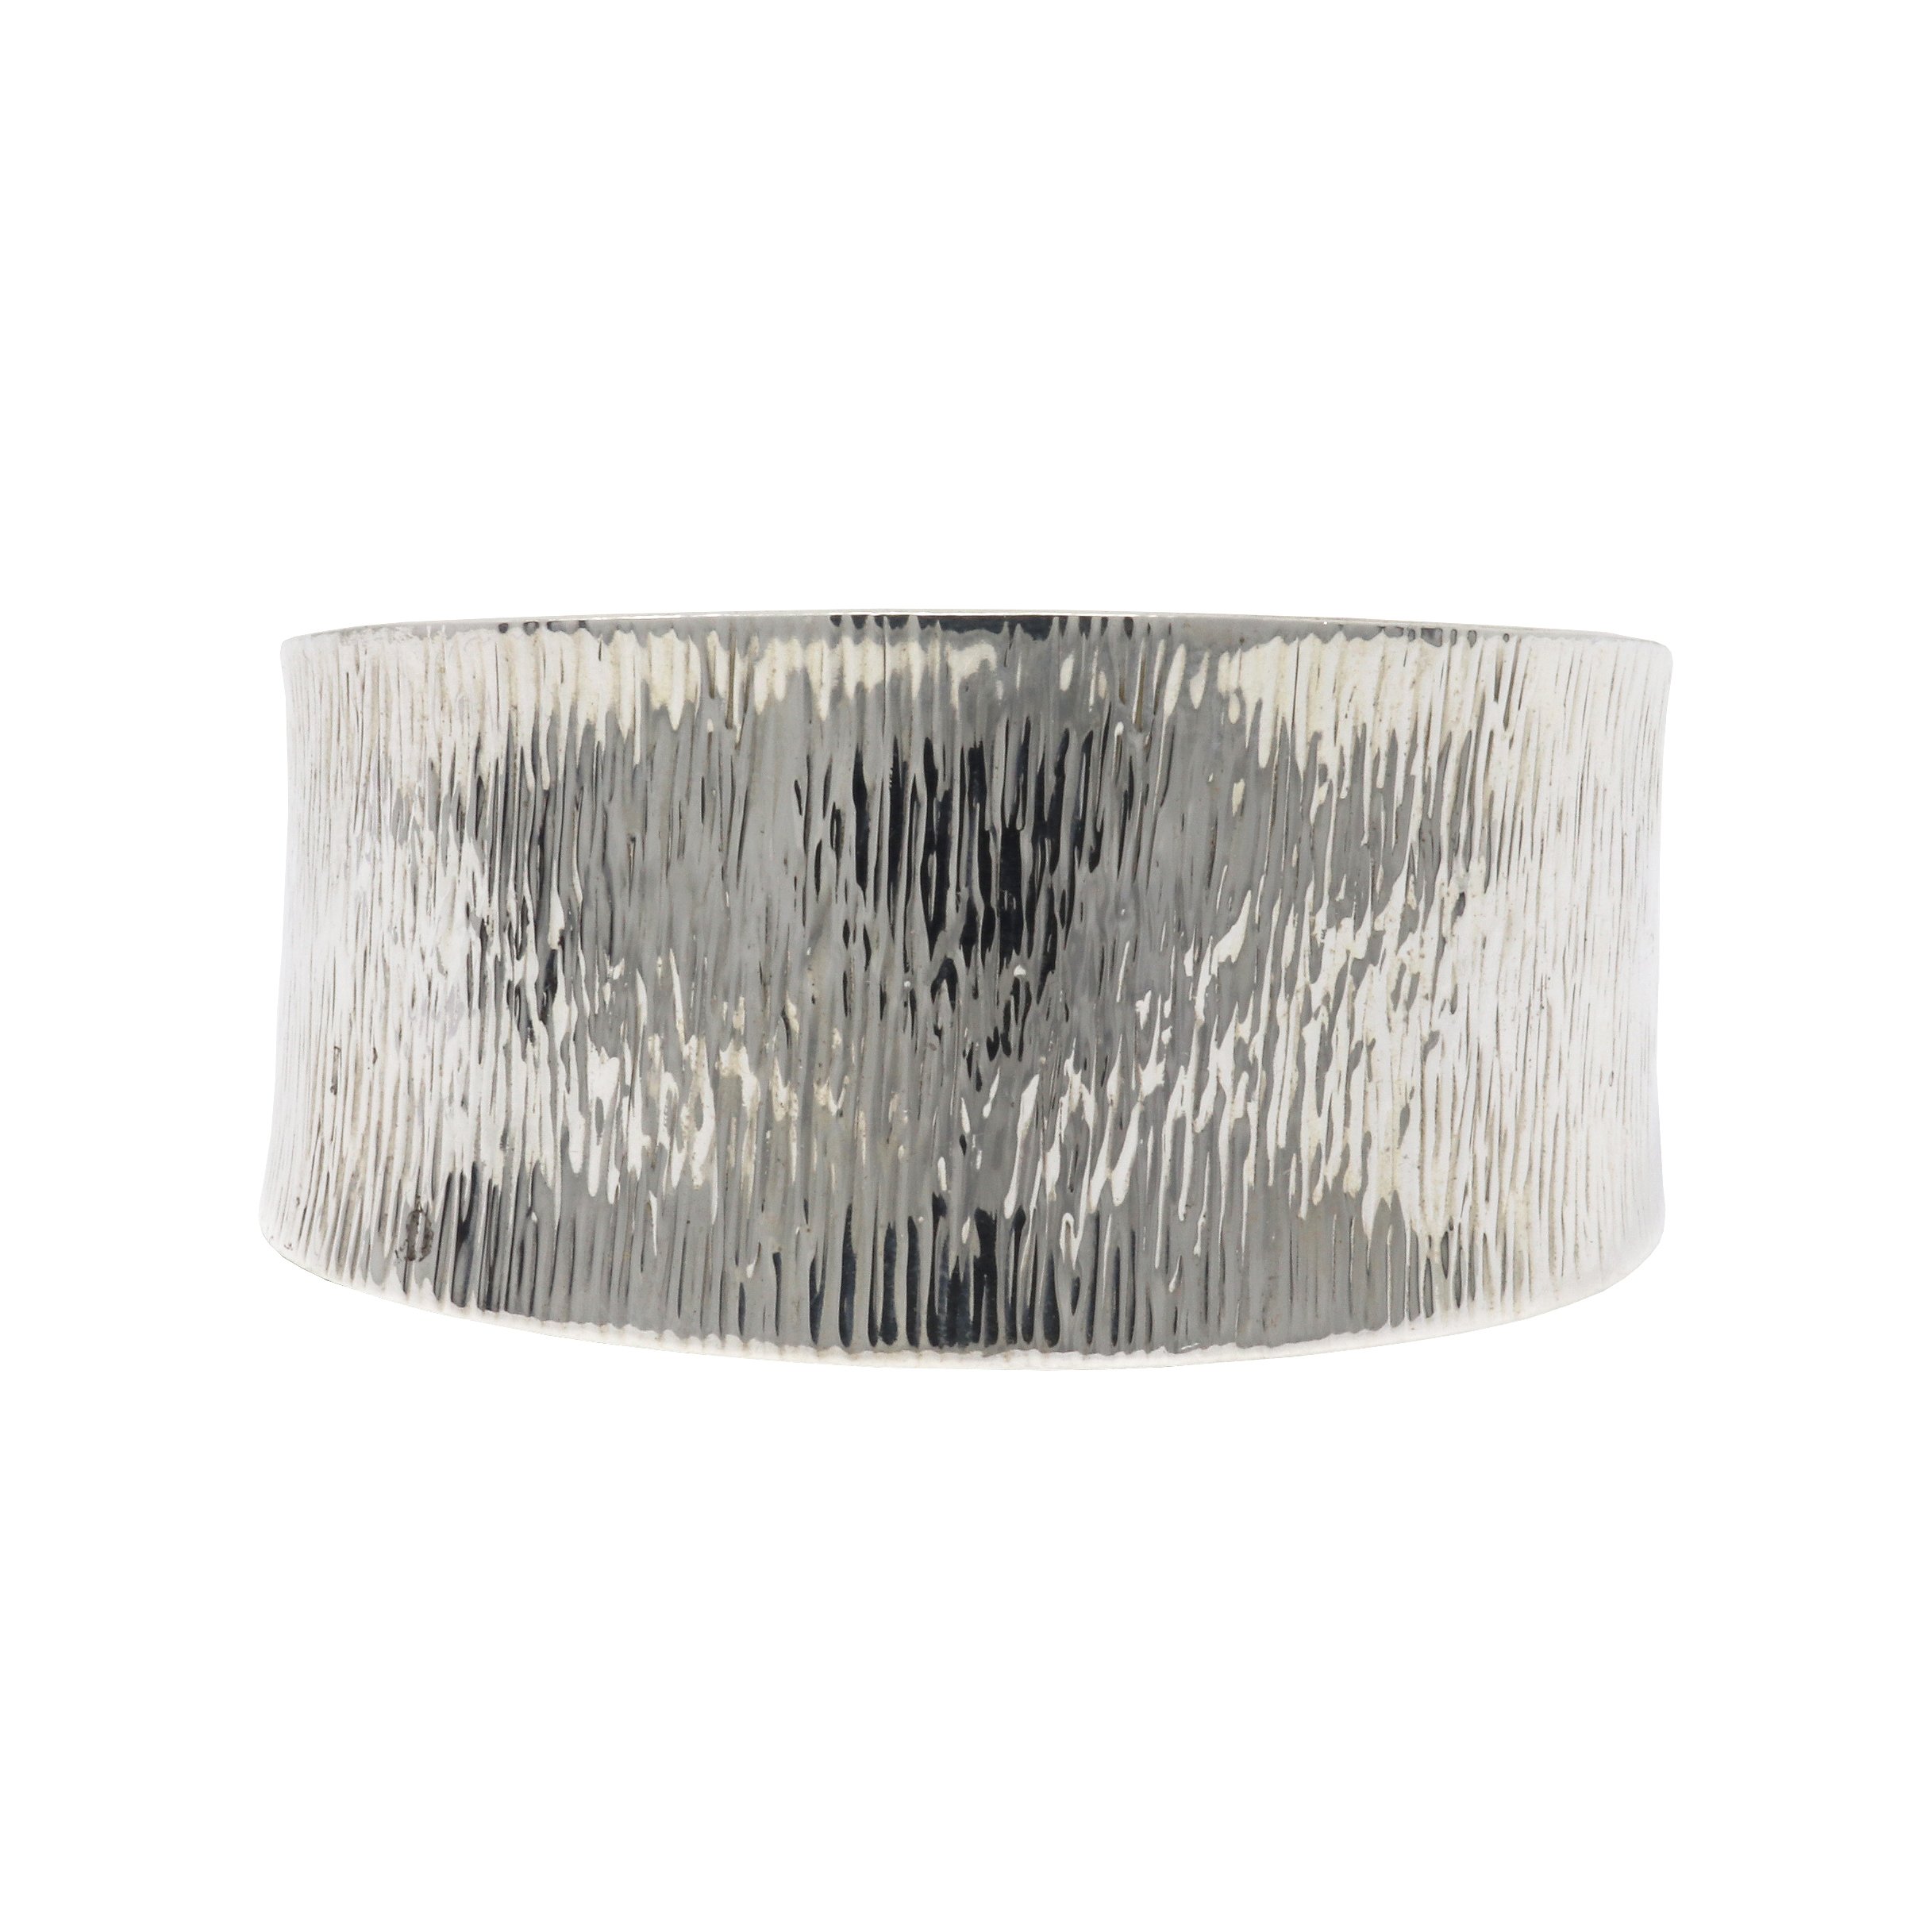 Sterling Silver Textured Cuff Bracelet -1"+ Edged